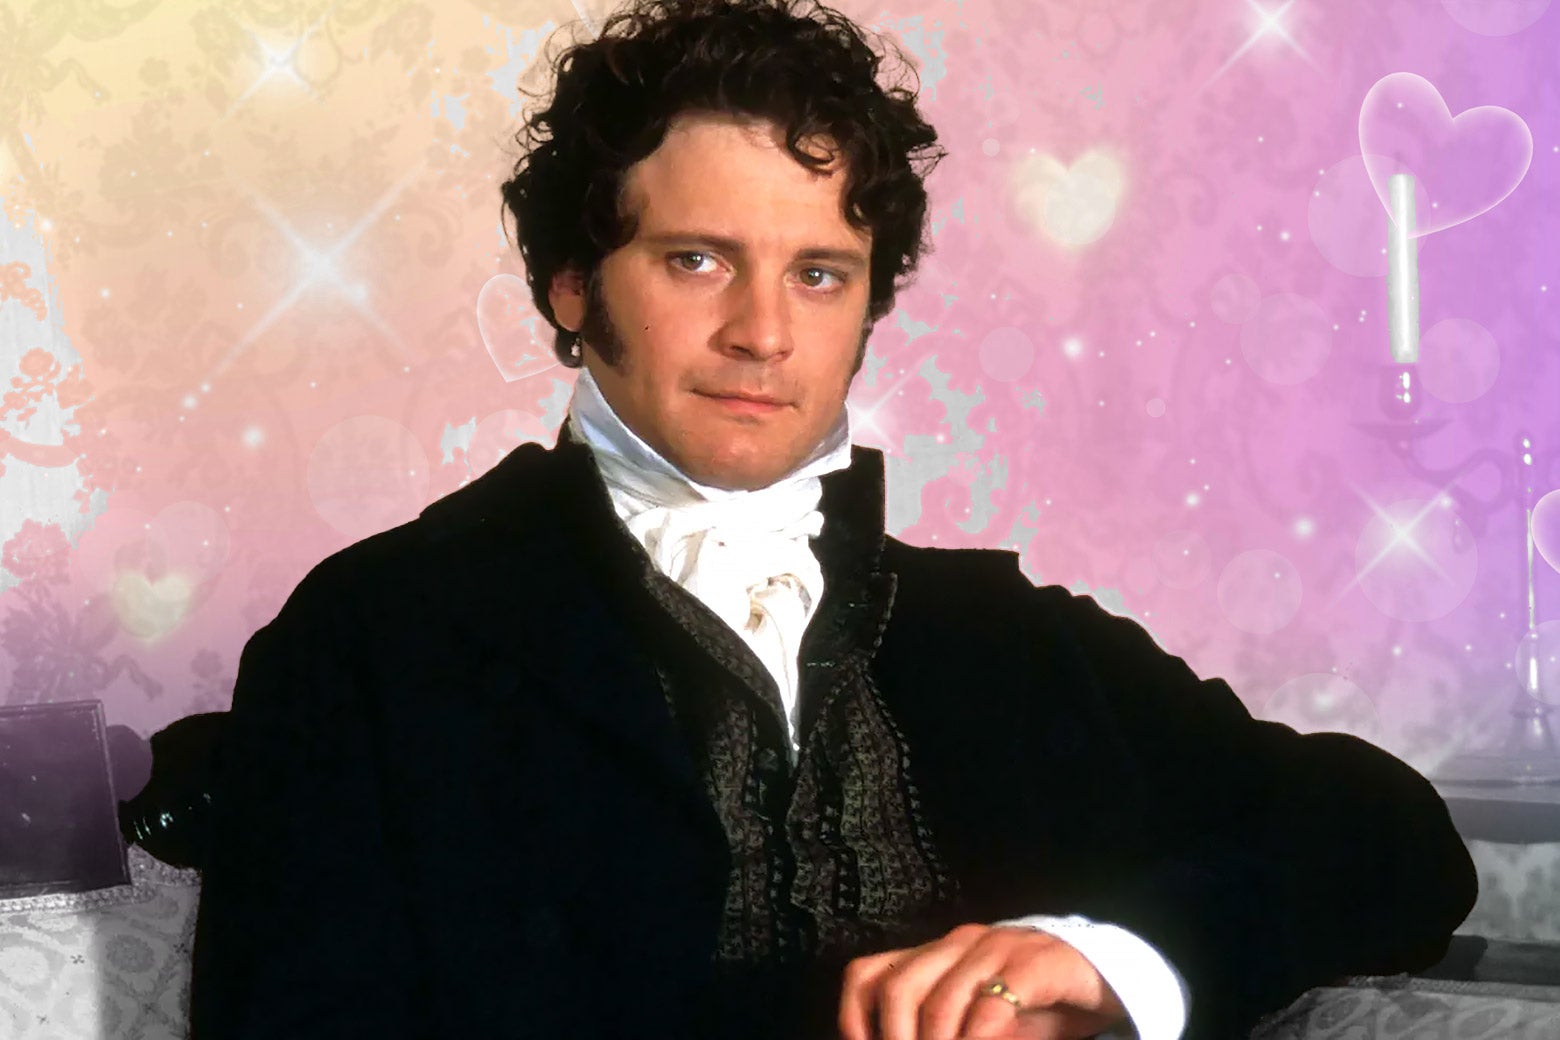 What is special about Mr. Darcy?